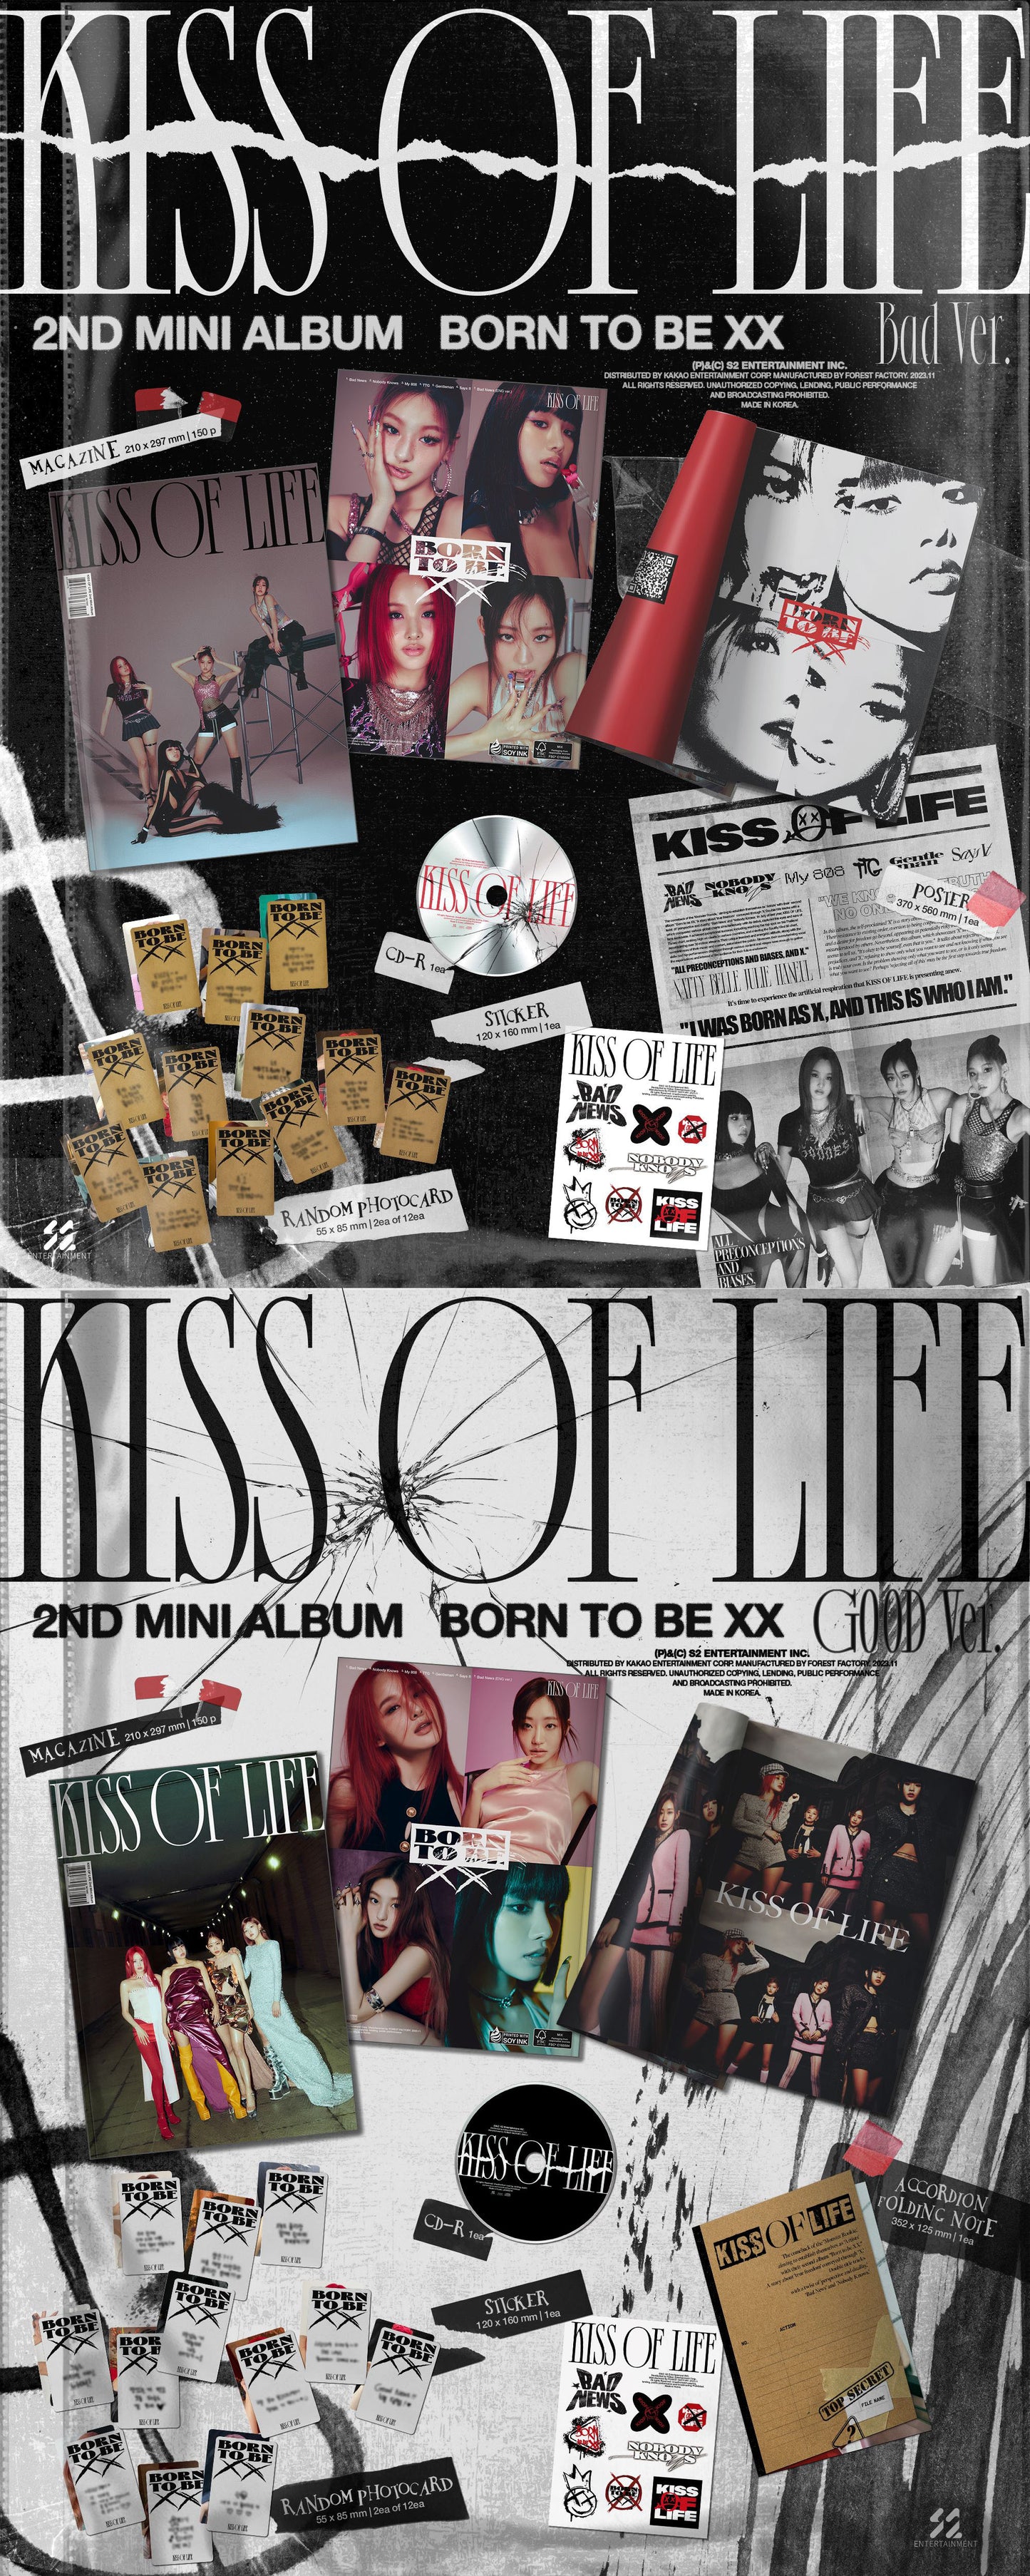 [PRE-ORDER] KISS OF LIFE - 2ND MINI ALBUM [Born to be XX] + WhosfanPhotocard